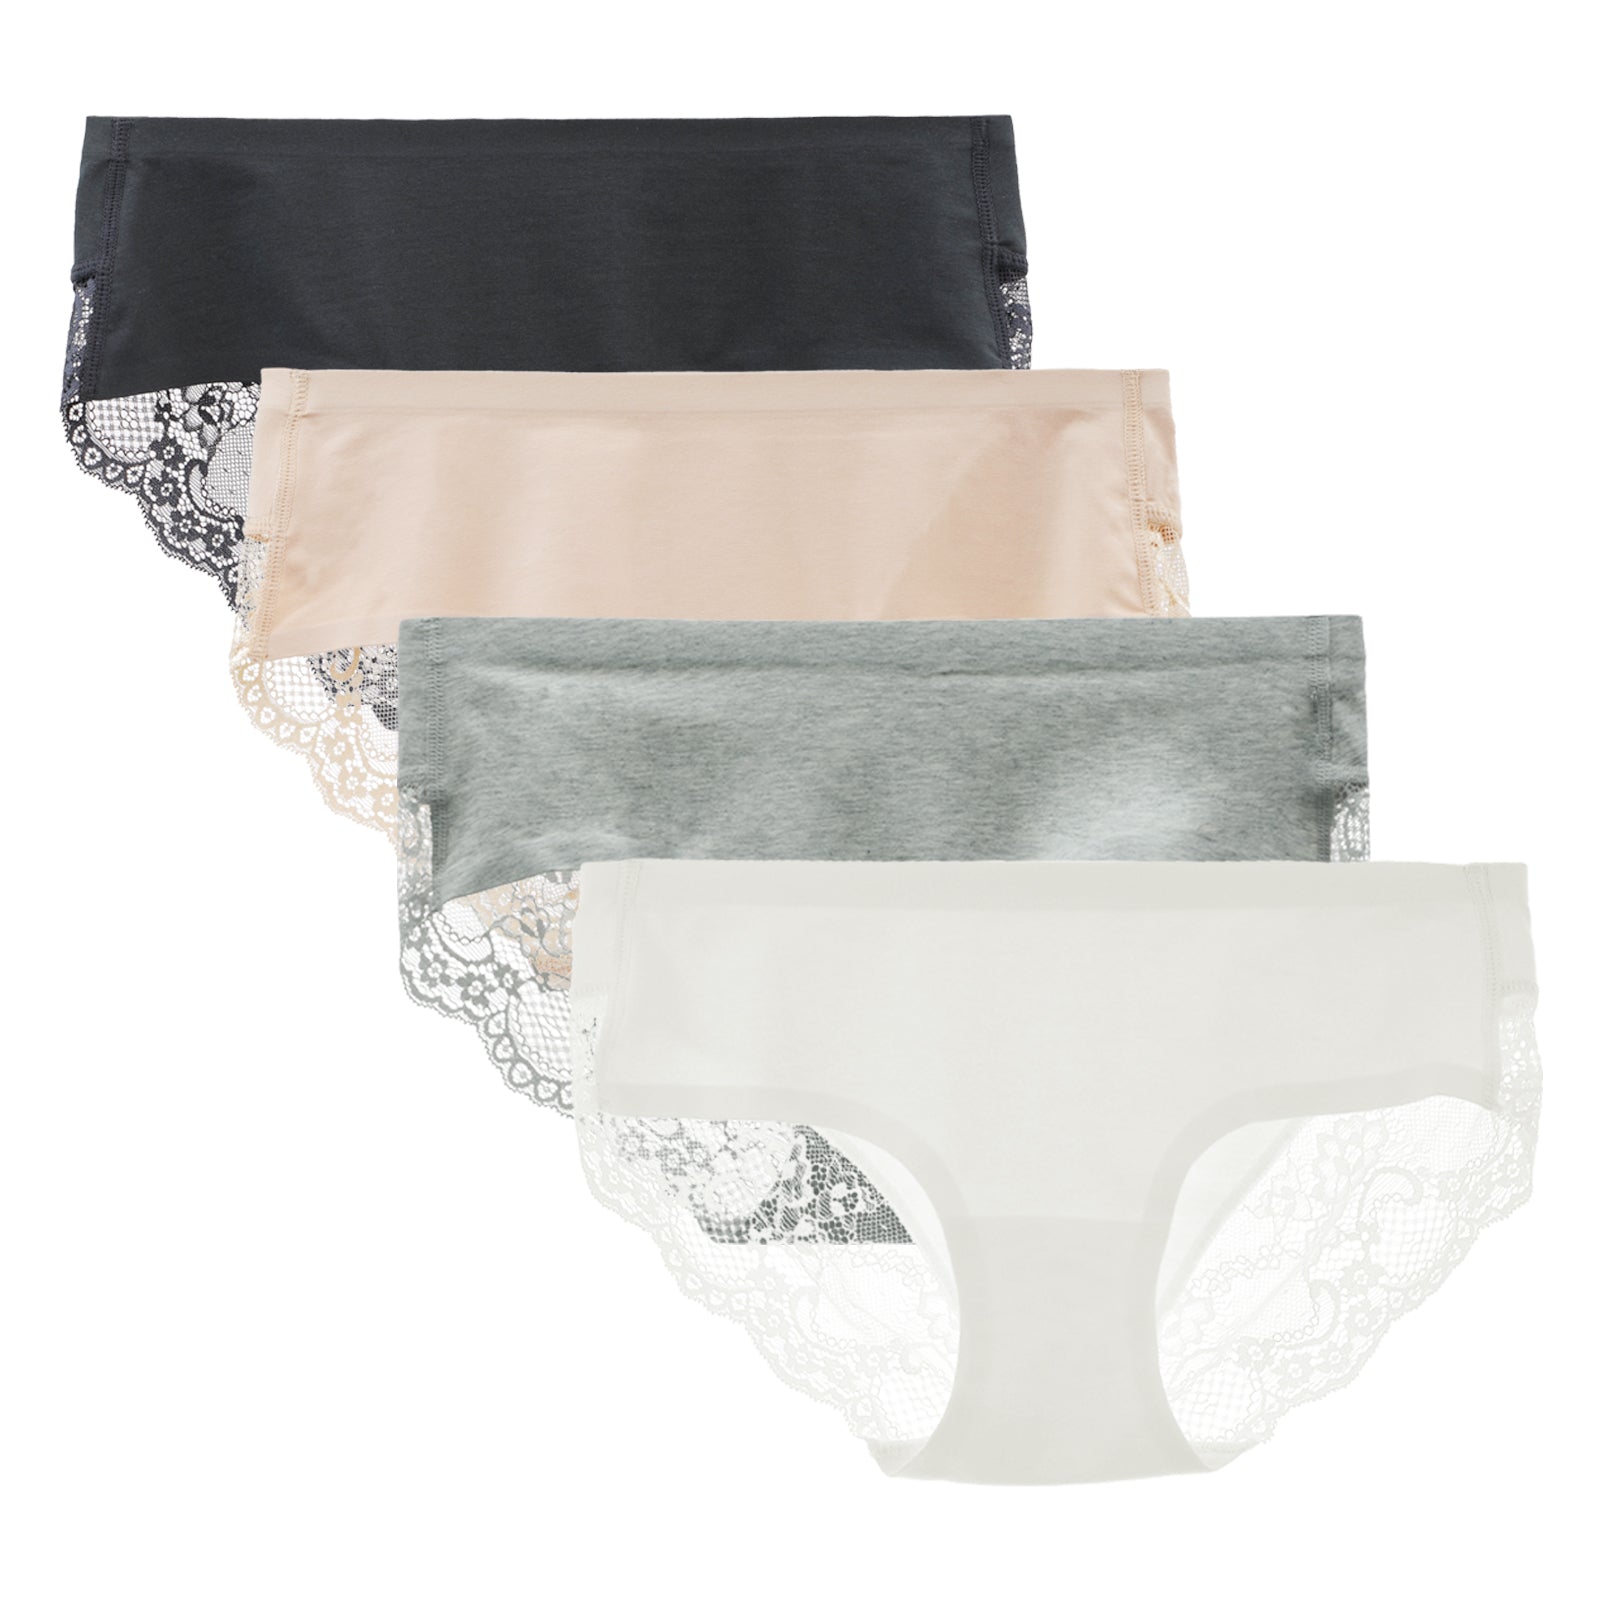 LIQQY Women's 4 Pack Cotton Lace Coverage Seamless Brief Hipster Panty